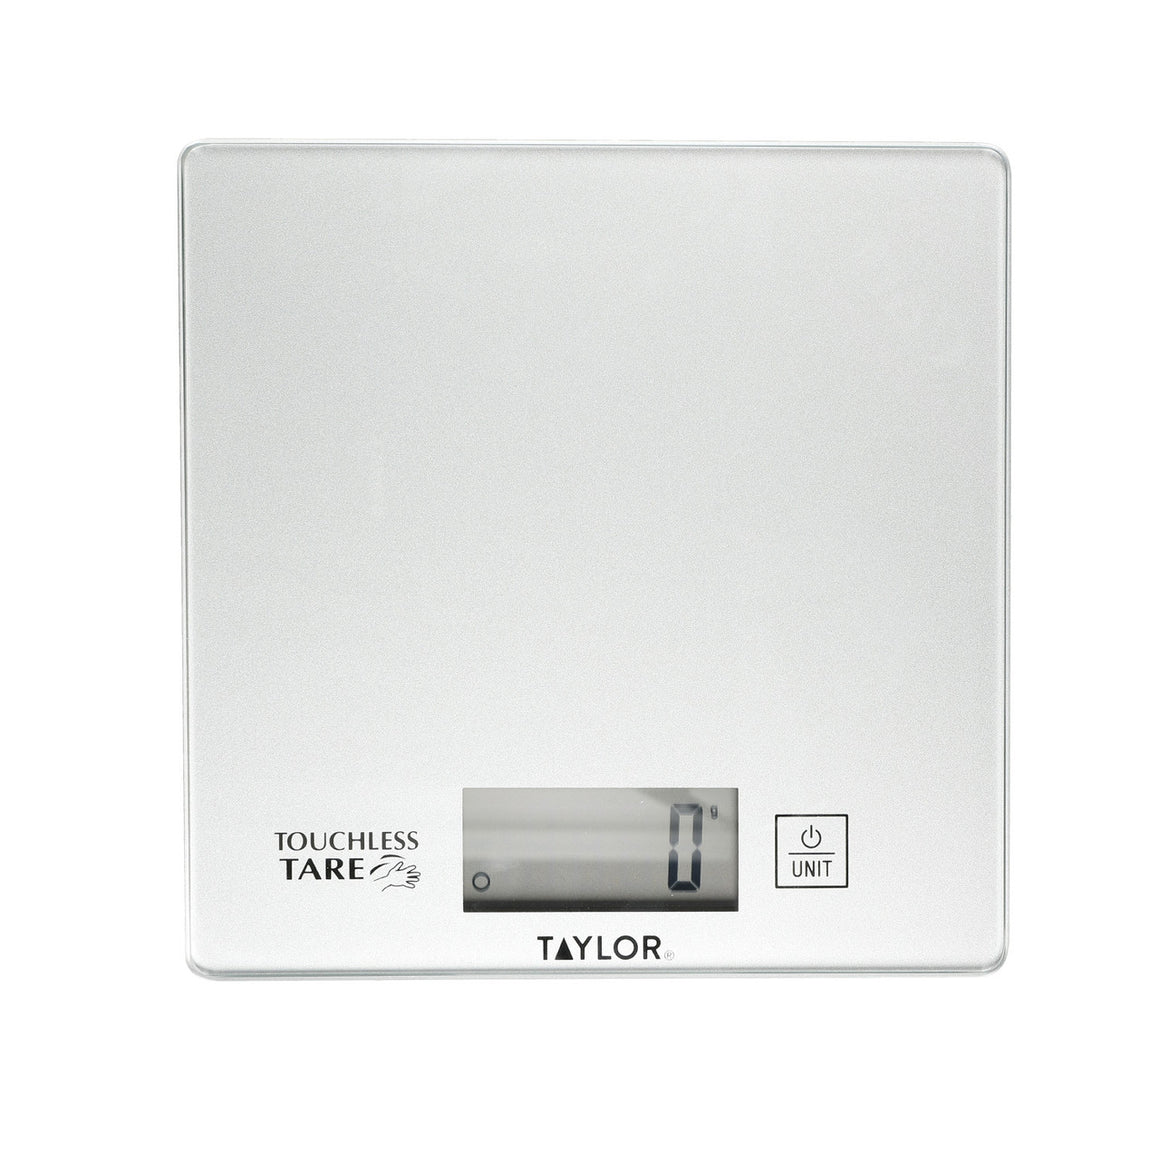 Taylor Pro Compact Digital Kitchen Scales